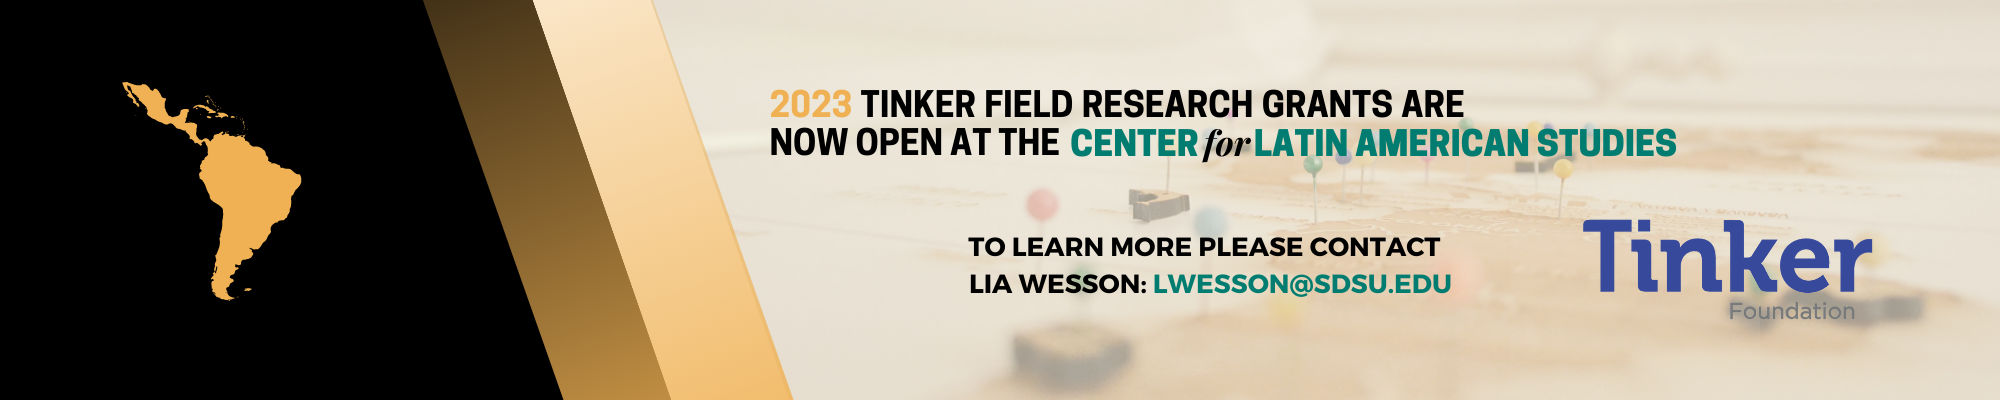 2023 TINKER FIELD RESEARCH GRANTS ARE NOW OPEN AT THE CENTER for LATIN AMERICAN STUDIES To learn more please contact Lia Wesson lwesson@sdsu.edu